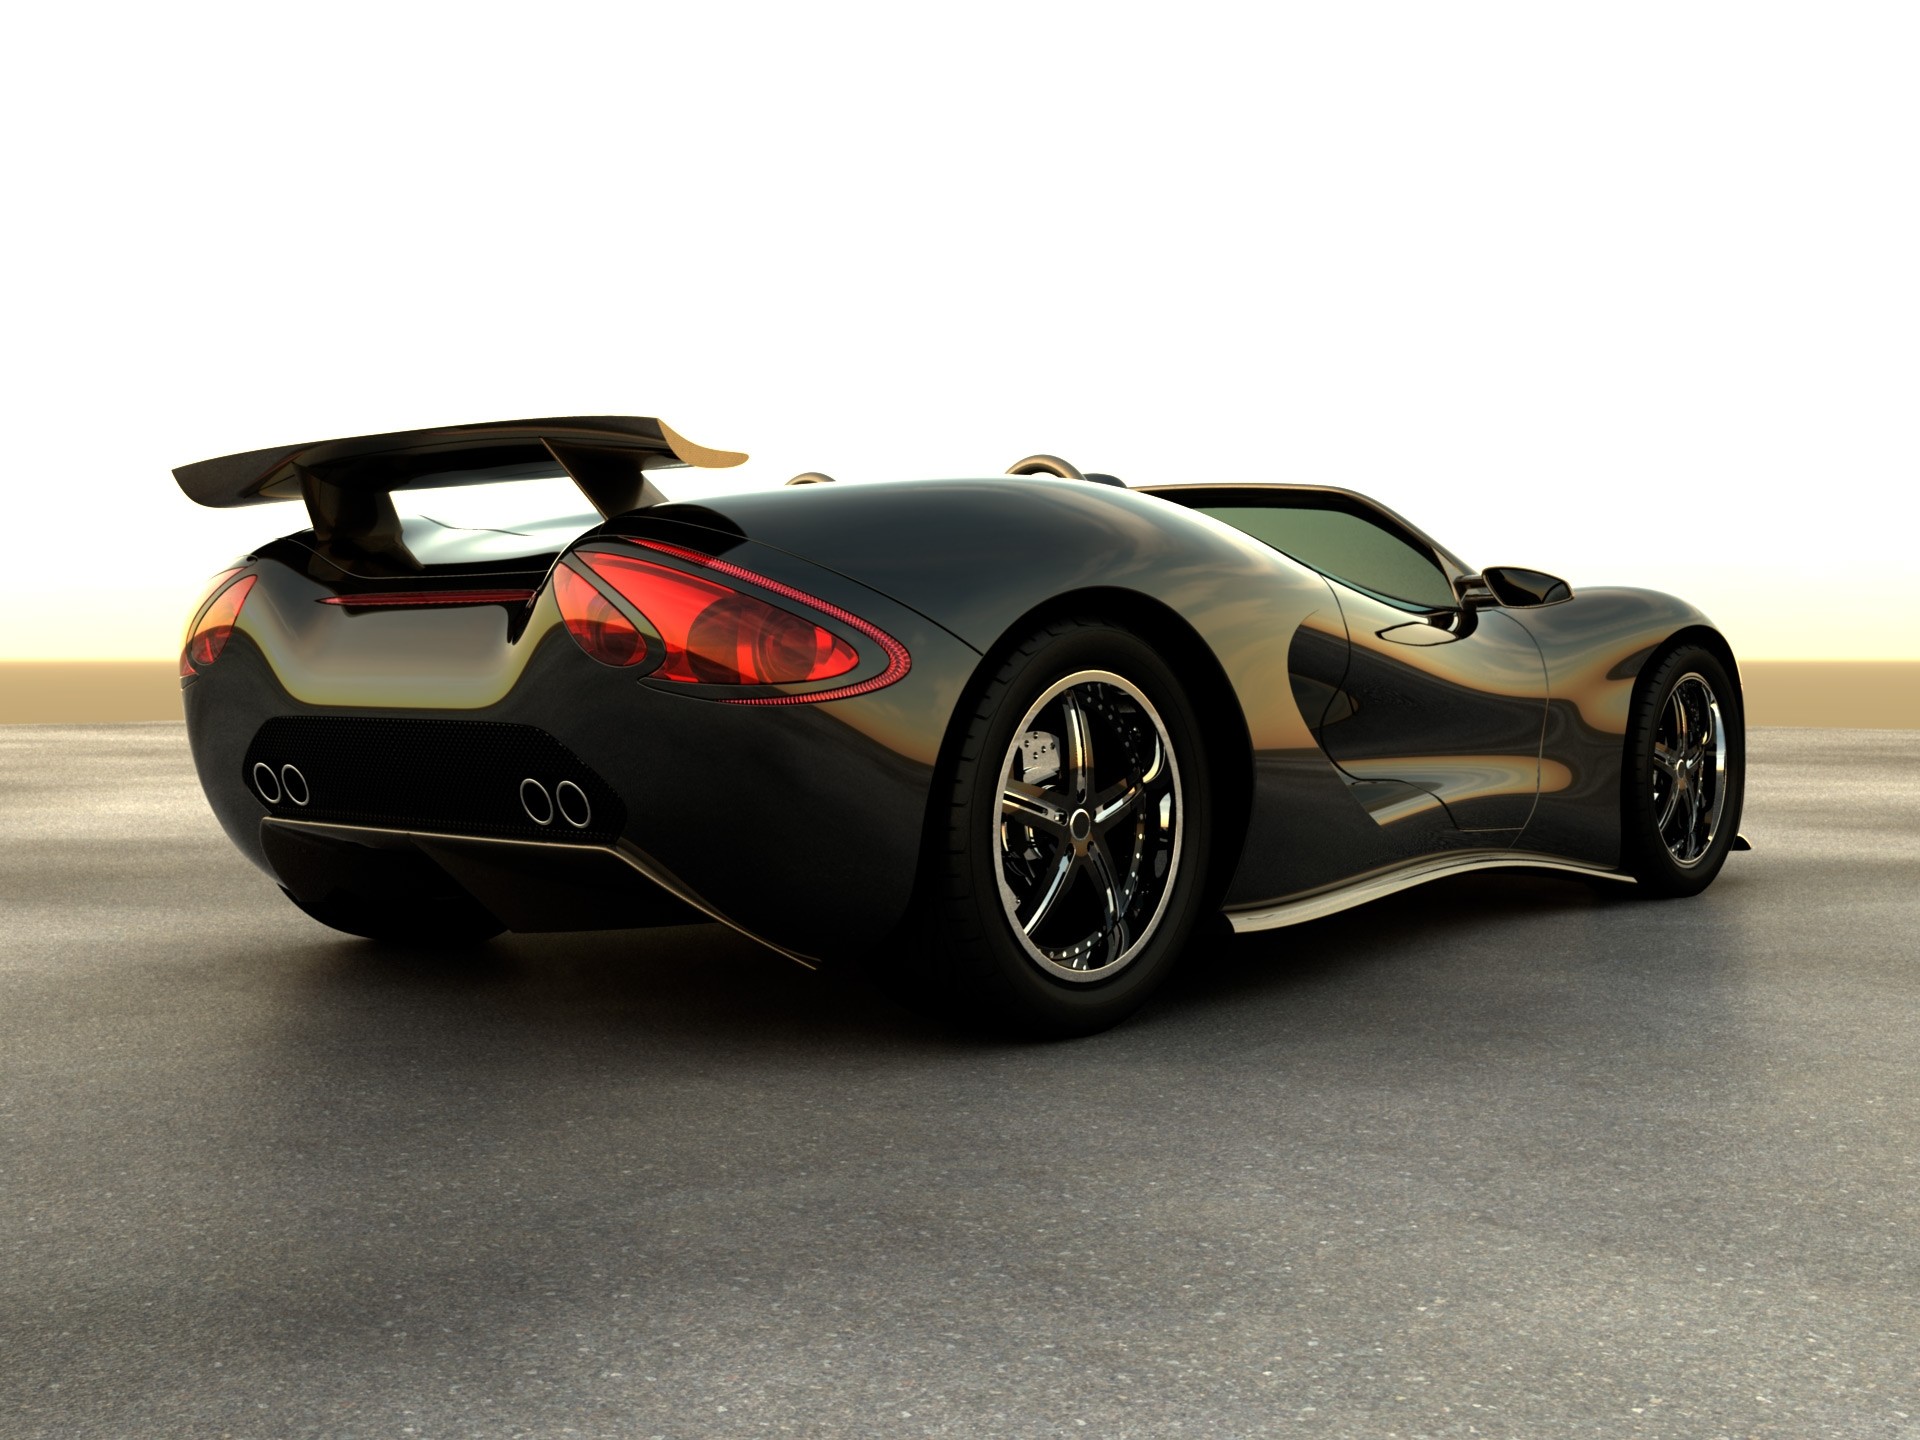 1920x1440 Click here to download in HD Format >> Sports Car Wallpaper http://